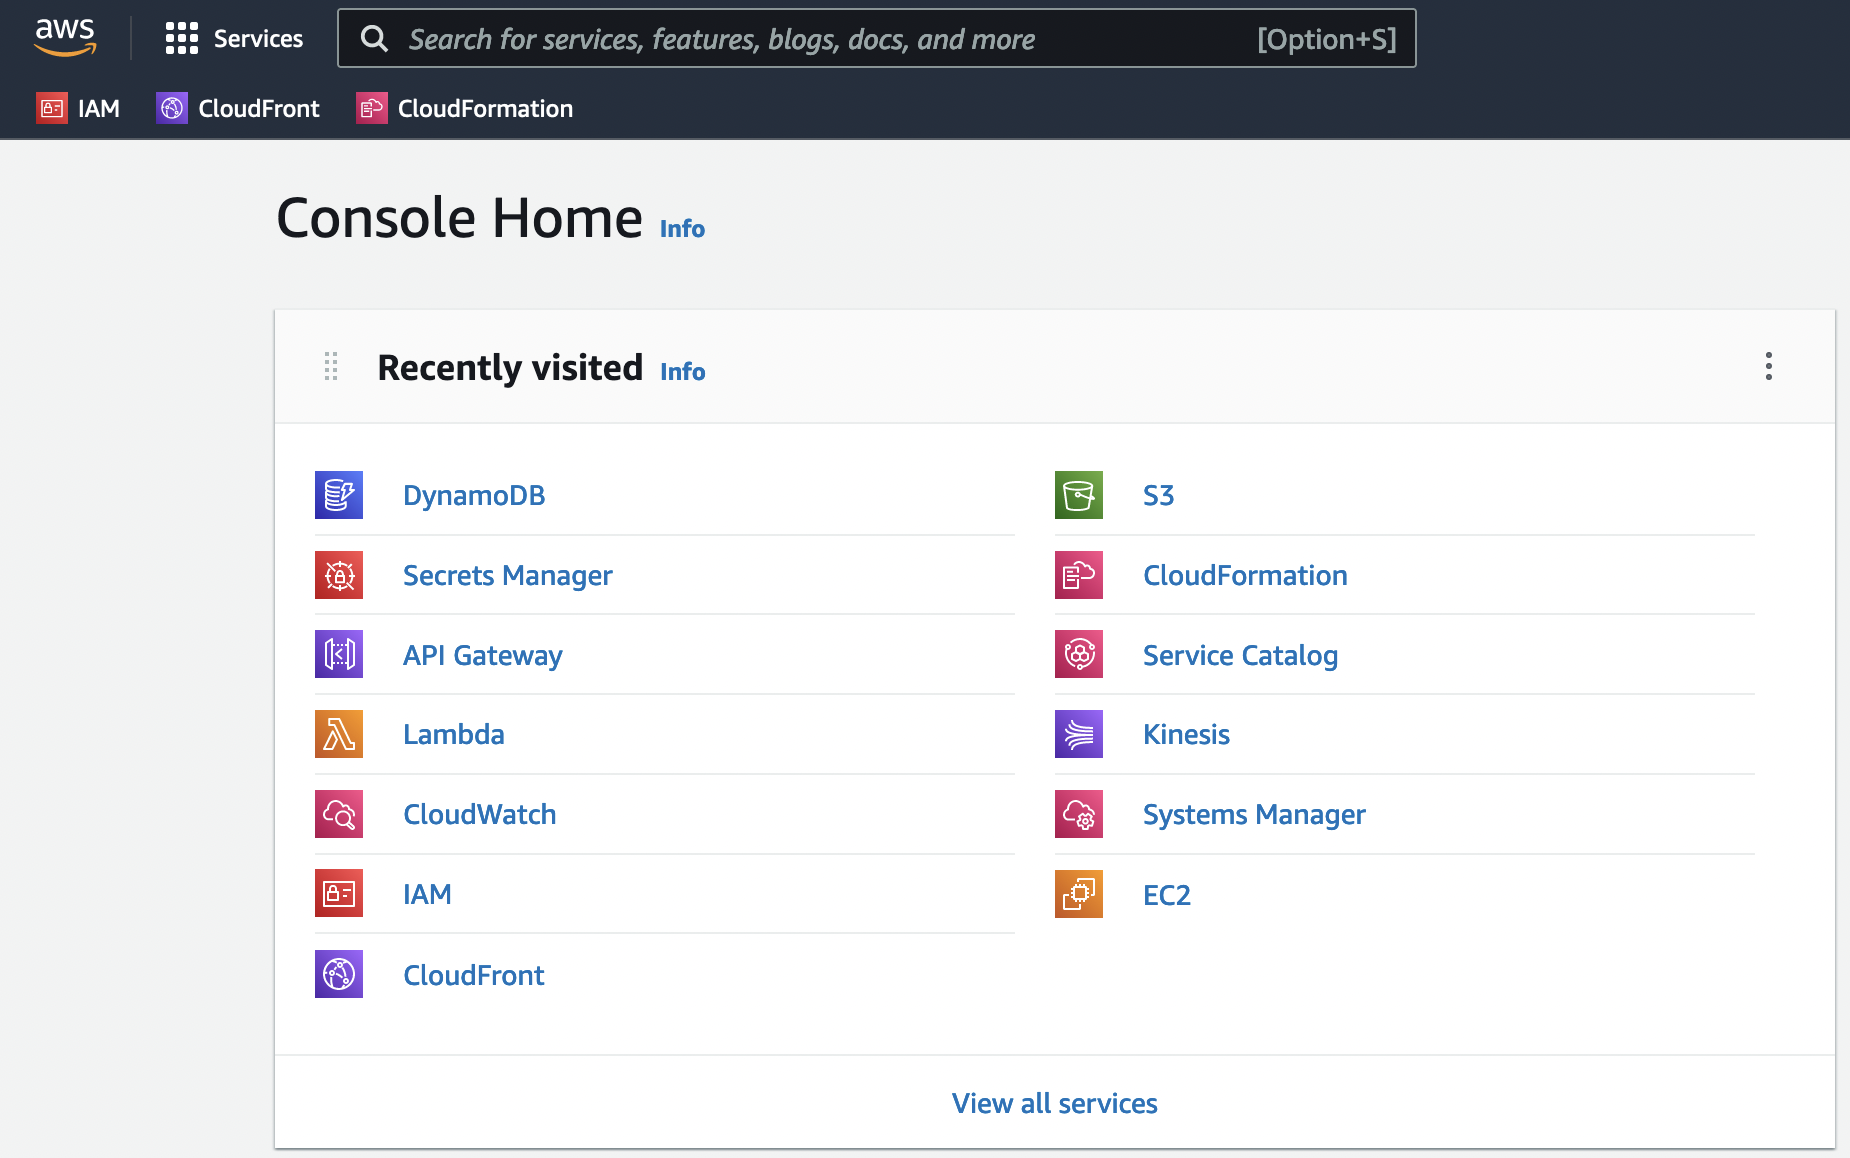 The AWS Console, showing a list of available services.